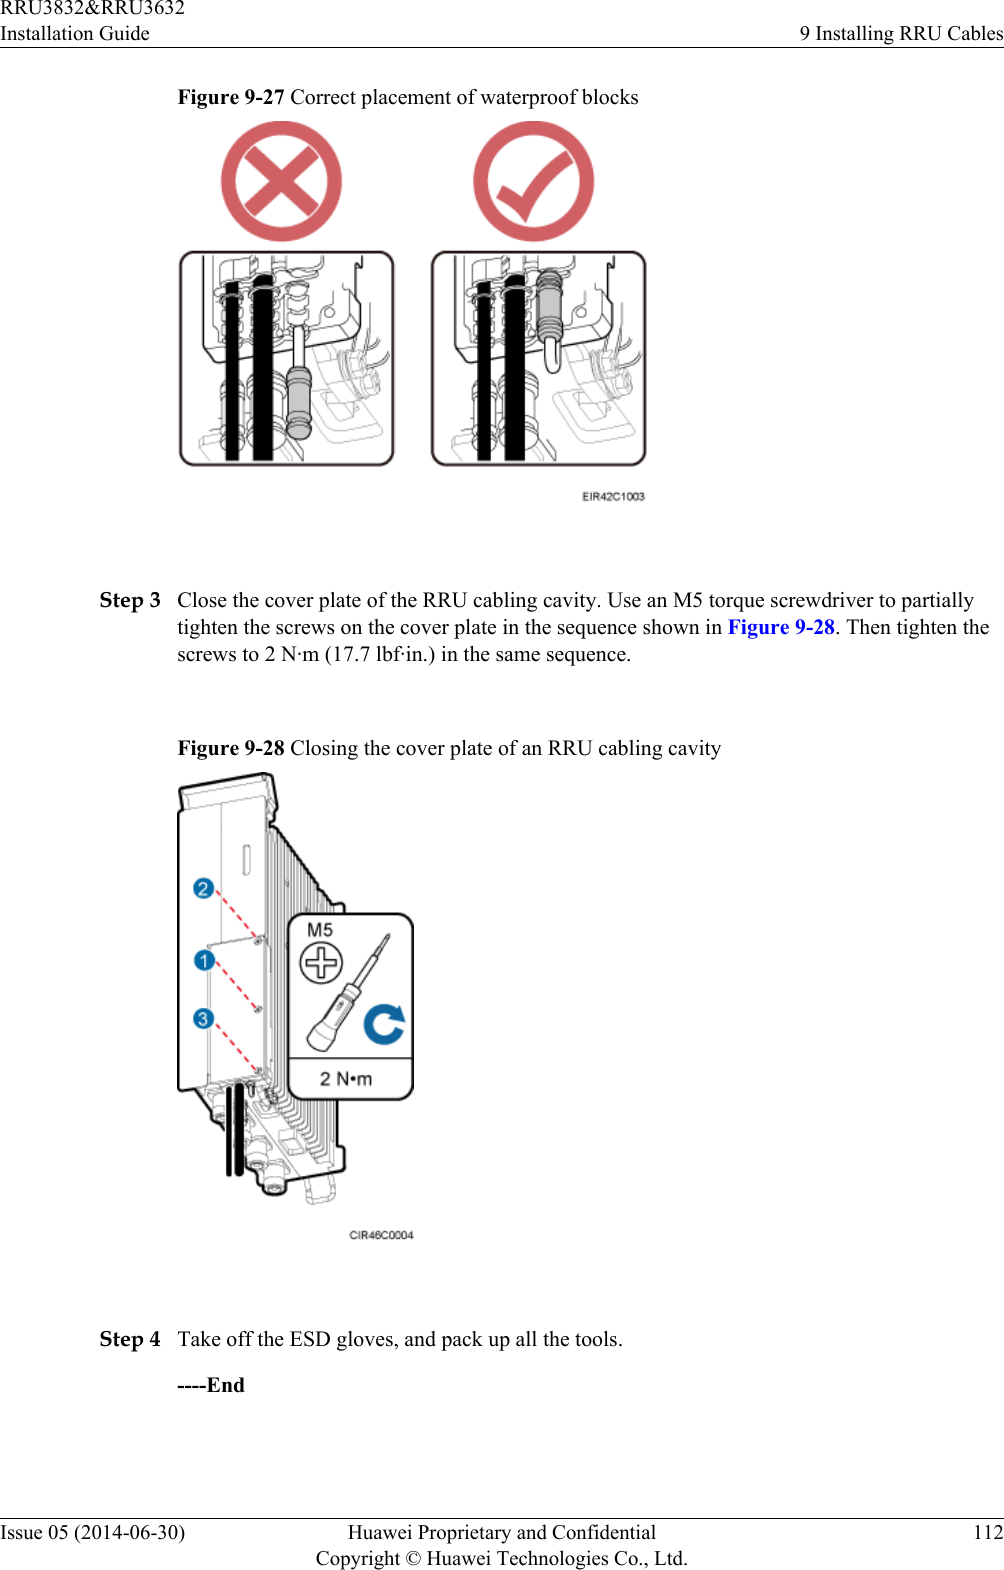 Figure 9-27 Correct placement of waterproof blocks Step 3 Close the cover plate of the RRU cabling cavity. Use an M5 torque screwdriver to partiallytighten the screws on the cover plate in the sequence shown in Figure 9-28. Then tighten thescrews to 2 N·m (17.7 lbf·in.) in the same sequence.Figure 9-28 Closing the cover plate of an RRU cabling cavity Step 4 Take off the ESD gloves, and pack up all the tools.----EndRRU3832&amp;RRU3632Installation Guide 9 Installing RRU CablesIssue 05 (2014-06-30) Huawei Proprietary and ConfidentialCopyright © Huawei Technologies Co., Ltd.112